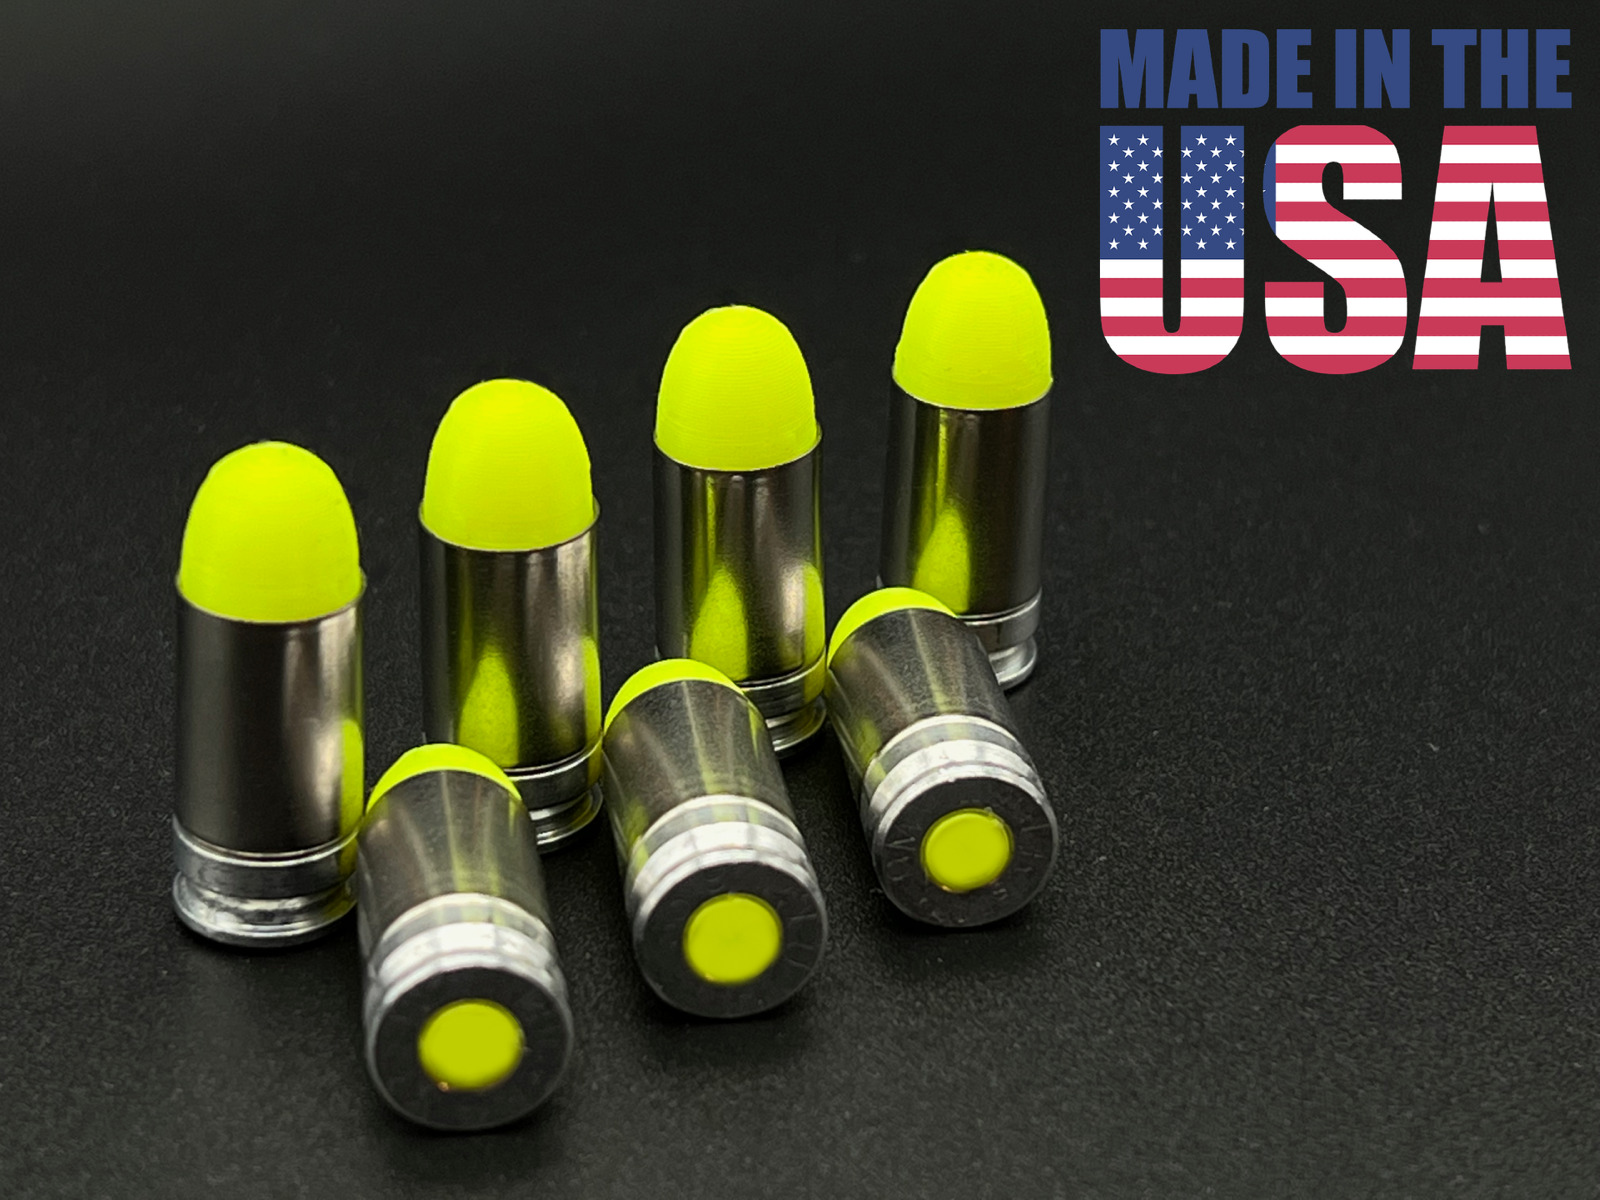 Premium Metal 9mm, Dummy Rounds, Snap Caps for Training **Made in USA